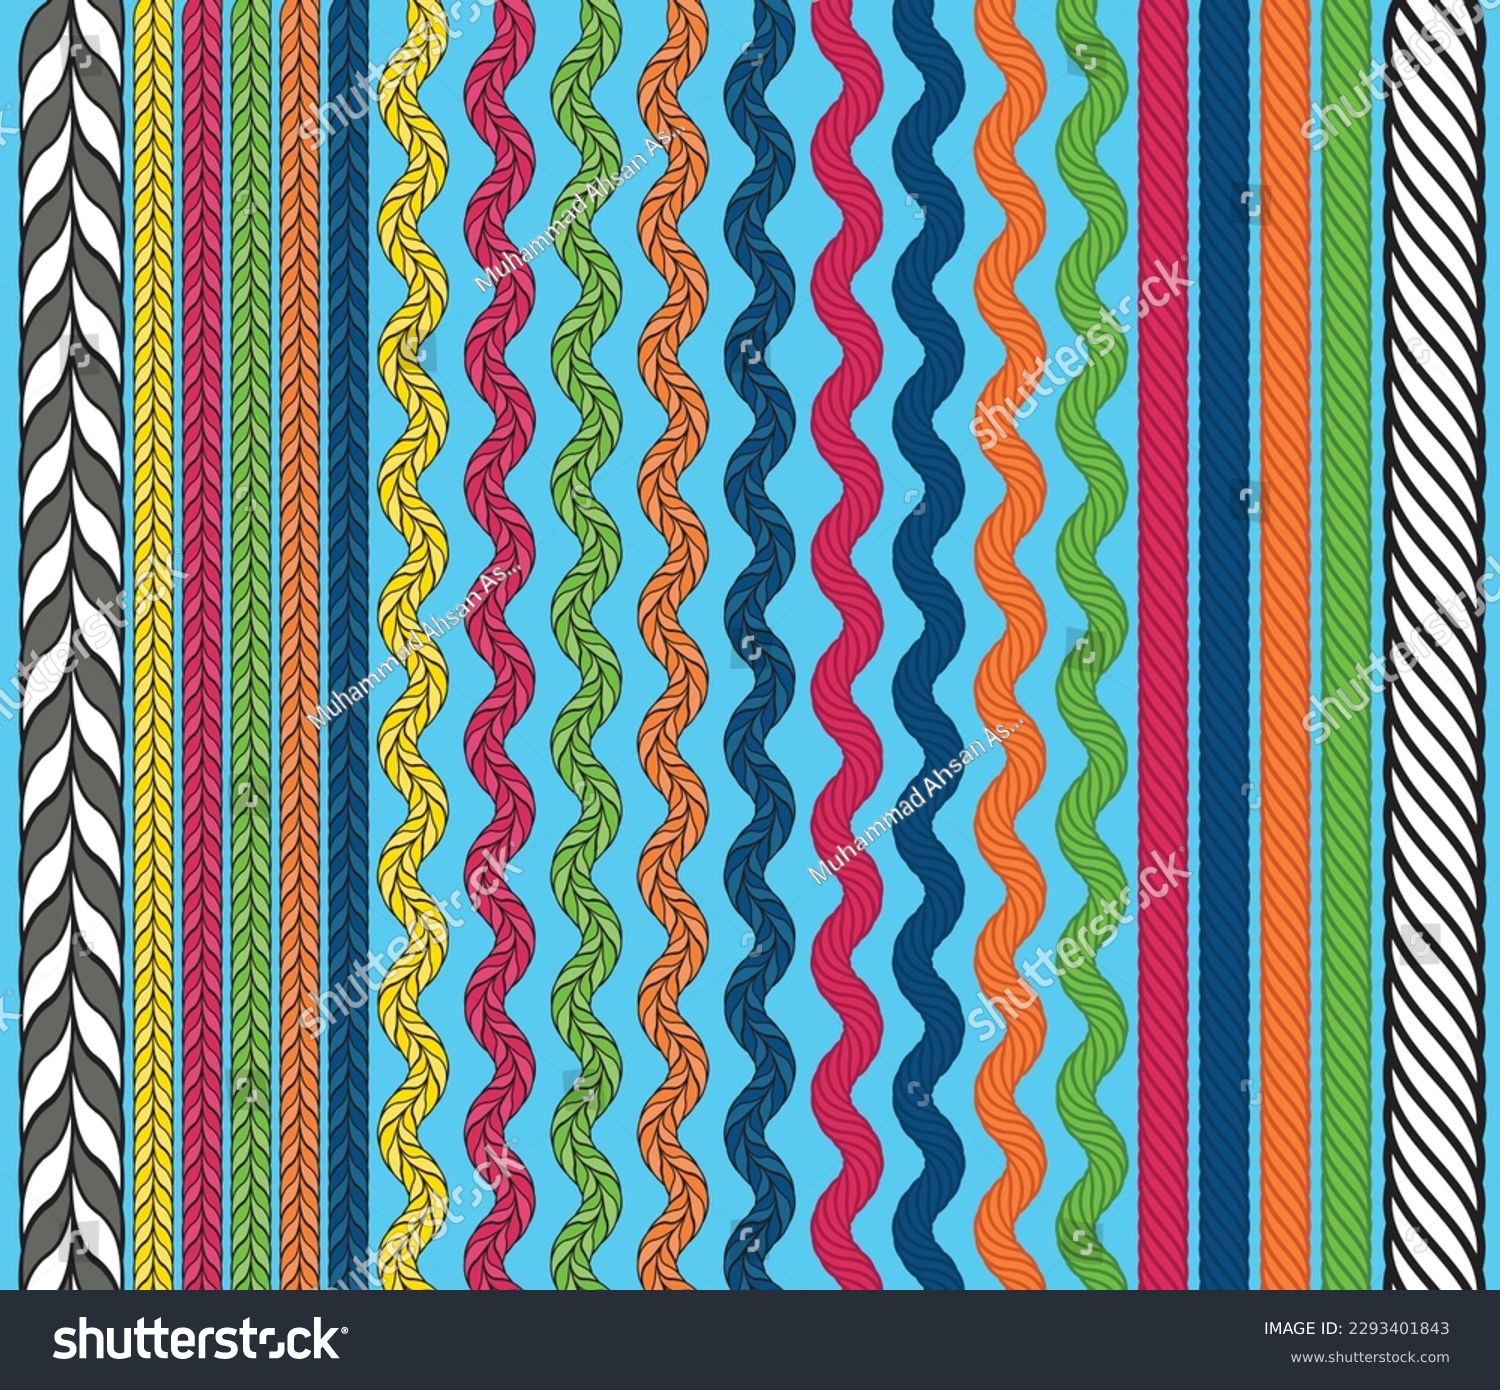 SVG of LEATHER BRAIDED STRAP ACCESSORIES IN MULTICOLOR VECTOR SKETCH svg